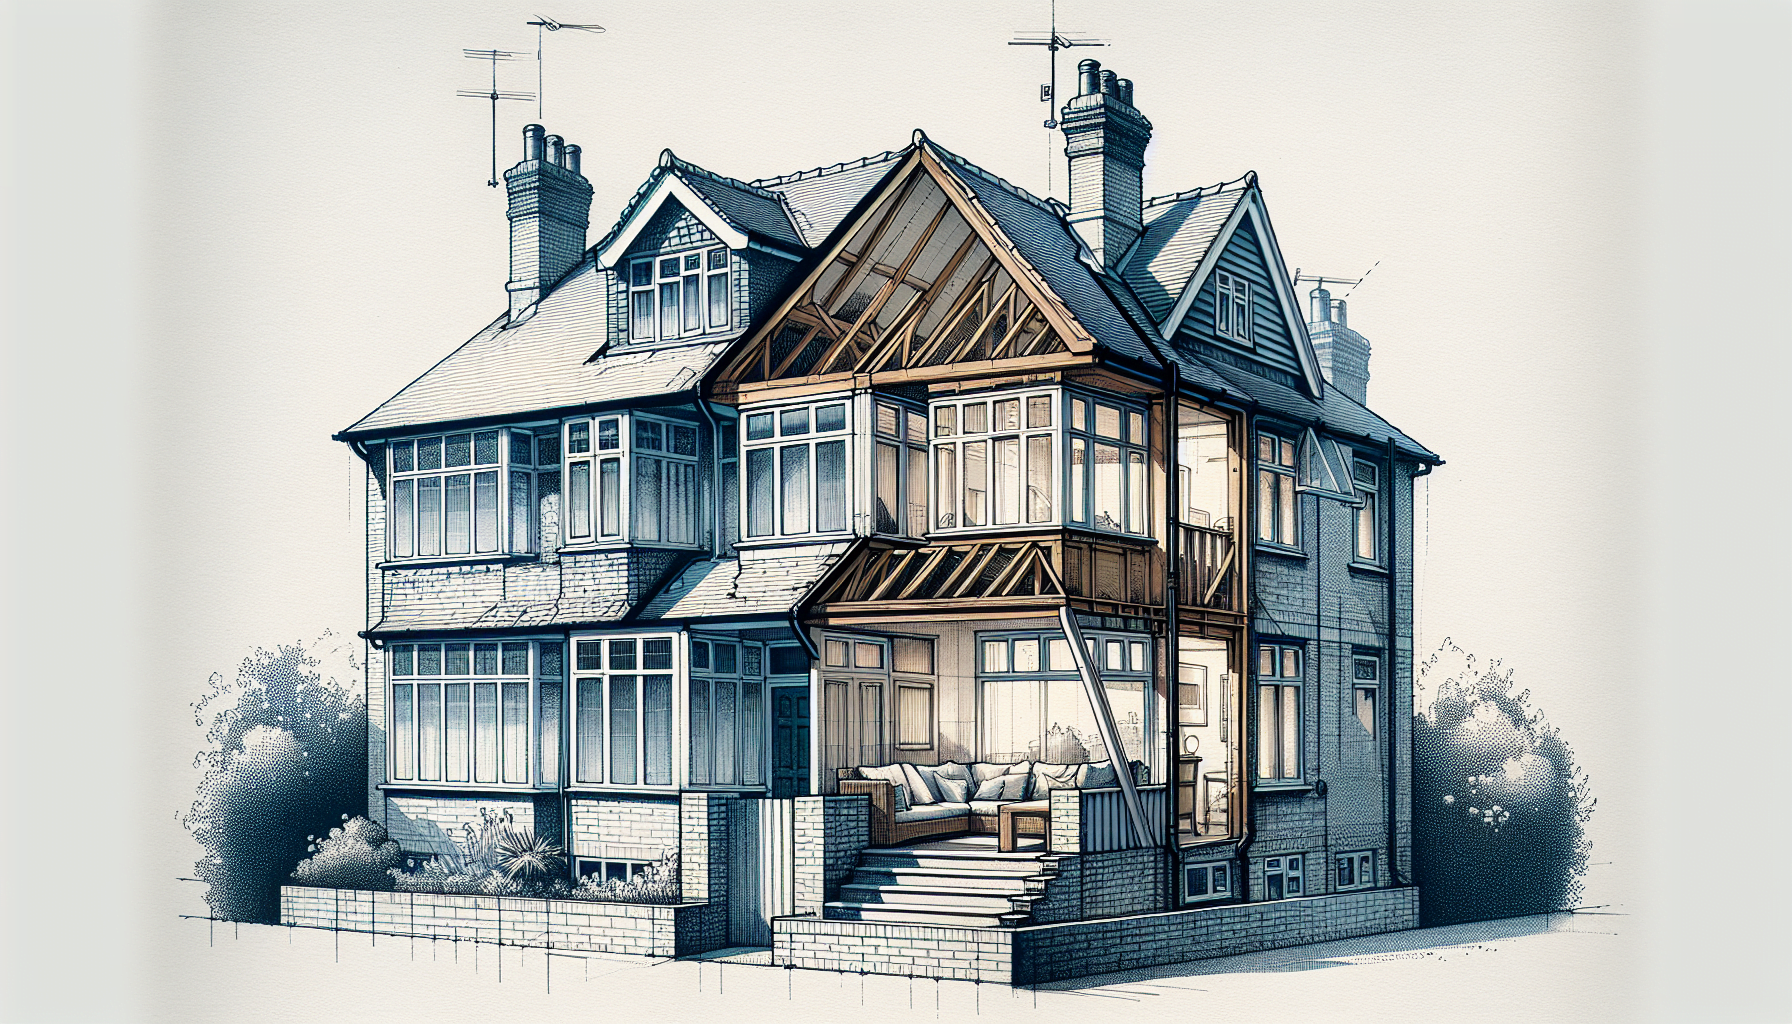 Illustration depicting the transformation of sloping roofs into vertical ends in hip-to-gable conversions